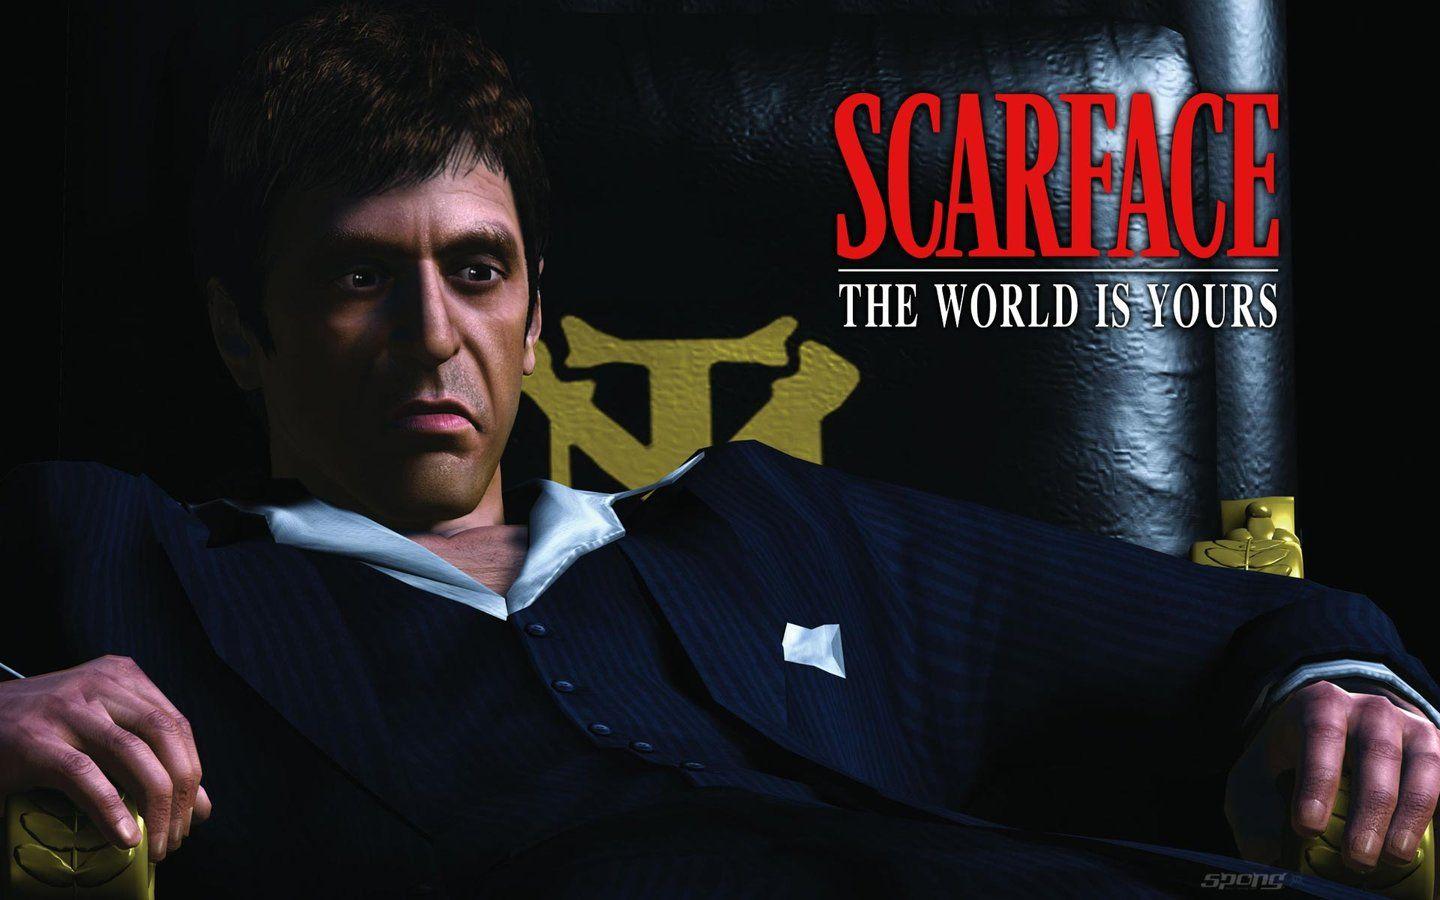 Wallpapers: Scarface: The World is Yours